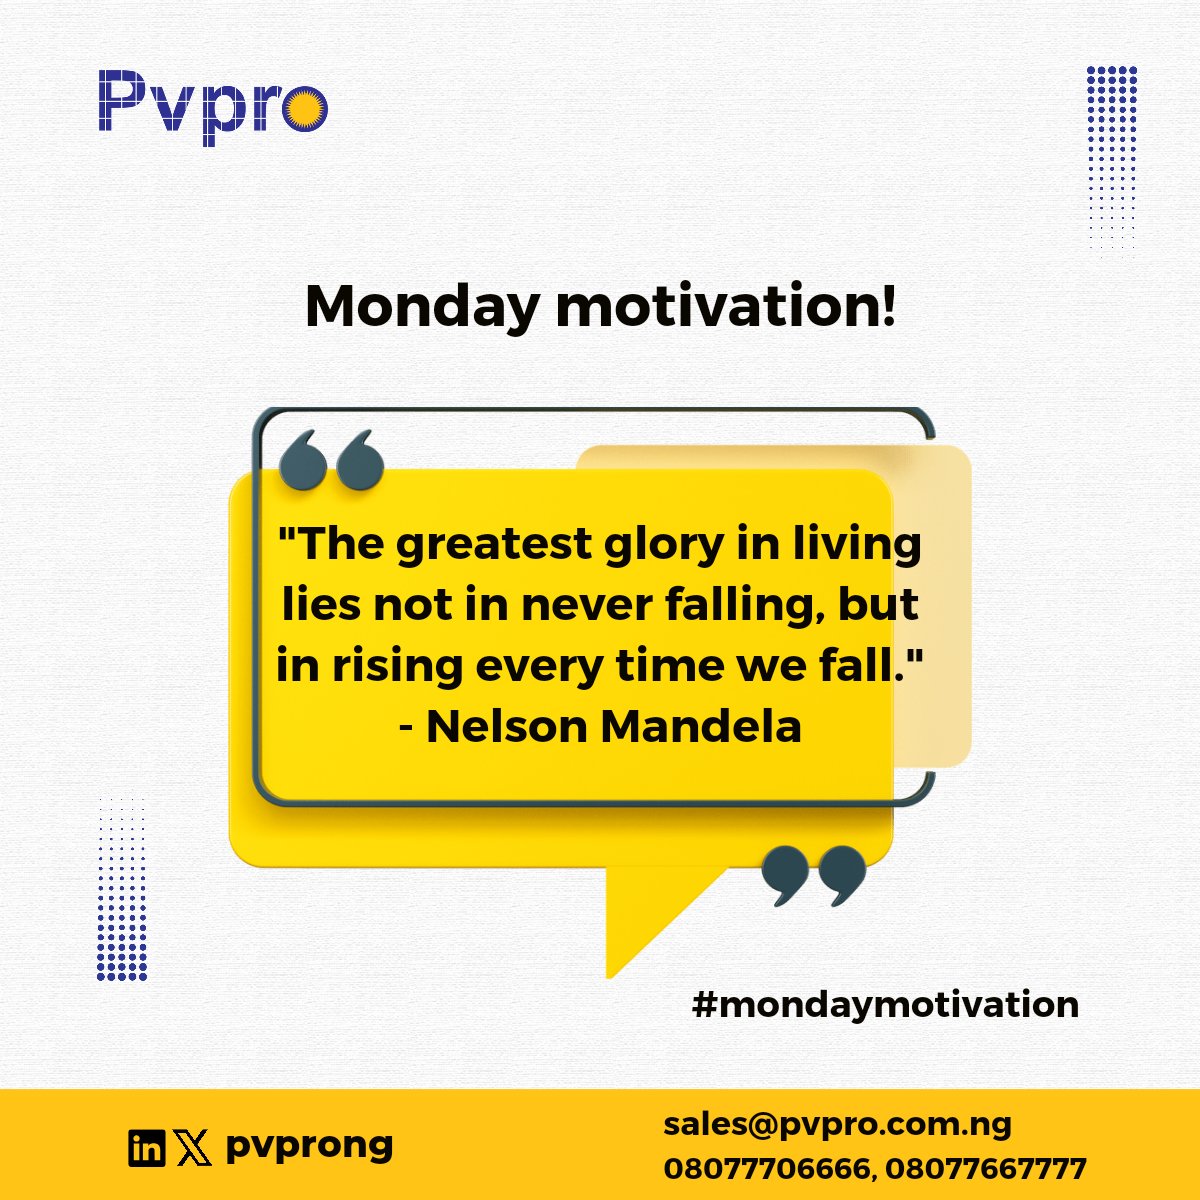 'The greatest glory in living lies not in never falling, but in rising every time we fall.' - Nelson Mandela
Happy new week!.

#mondaymotivation #mondayquotes #pvproenergy #bestsolarcompanyinlagos #solarinstallationcompany #solarpower #solarenergycompanyinlagos